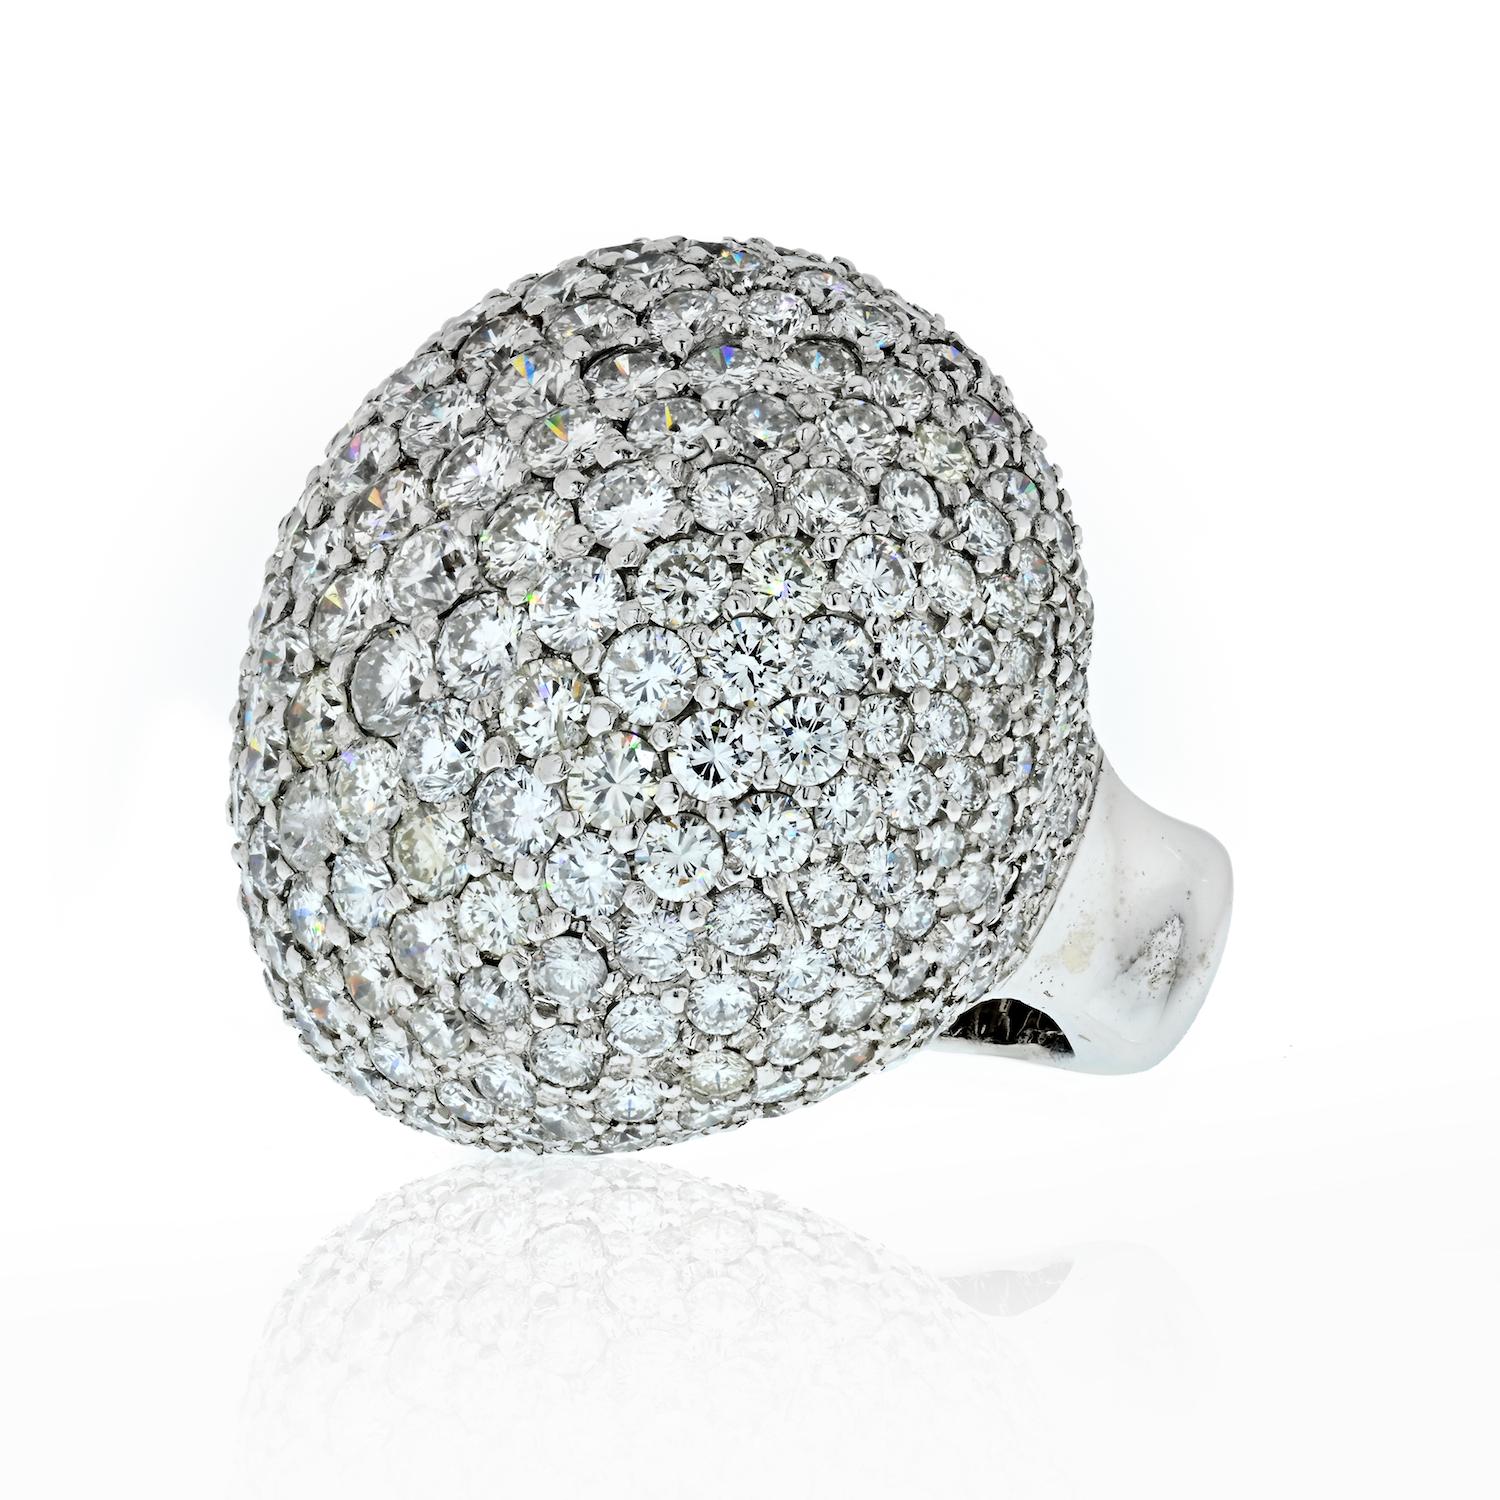 Prepare to dazzle with the opulent brilliance of this oversized dome ring, adorned with a million icy white diamonds totaling an impressive 25 carats. Crafted in classic 18K white gold, this luxurious ring is designed for those who seek the epitome